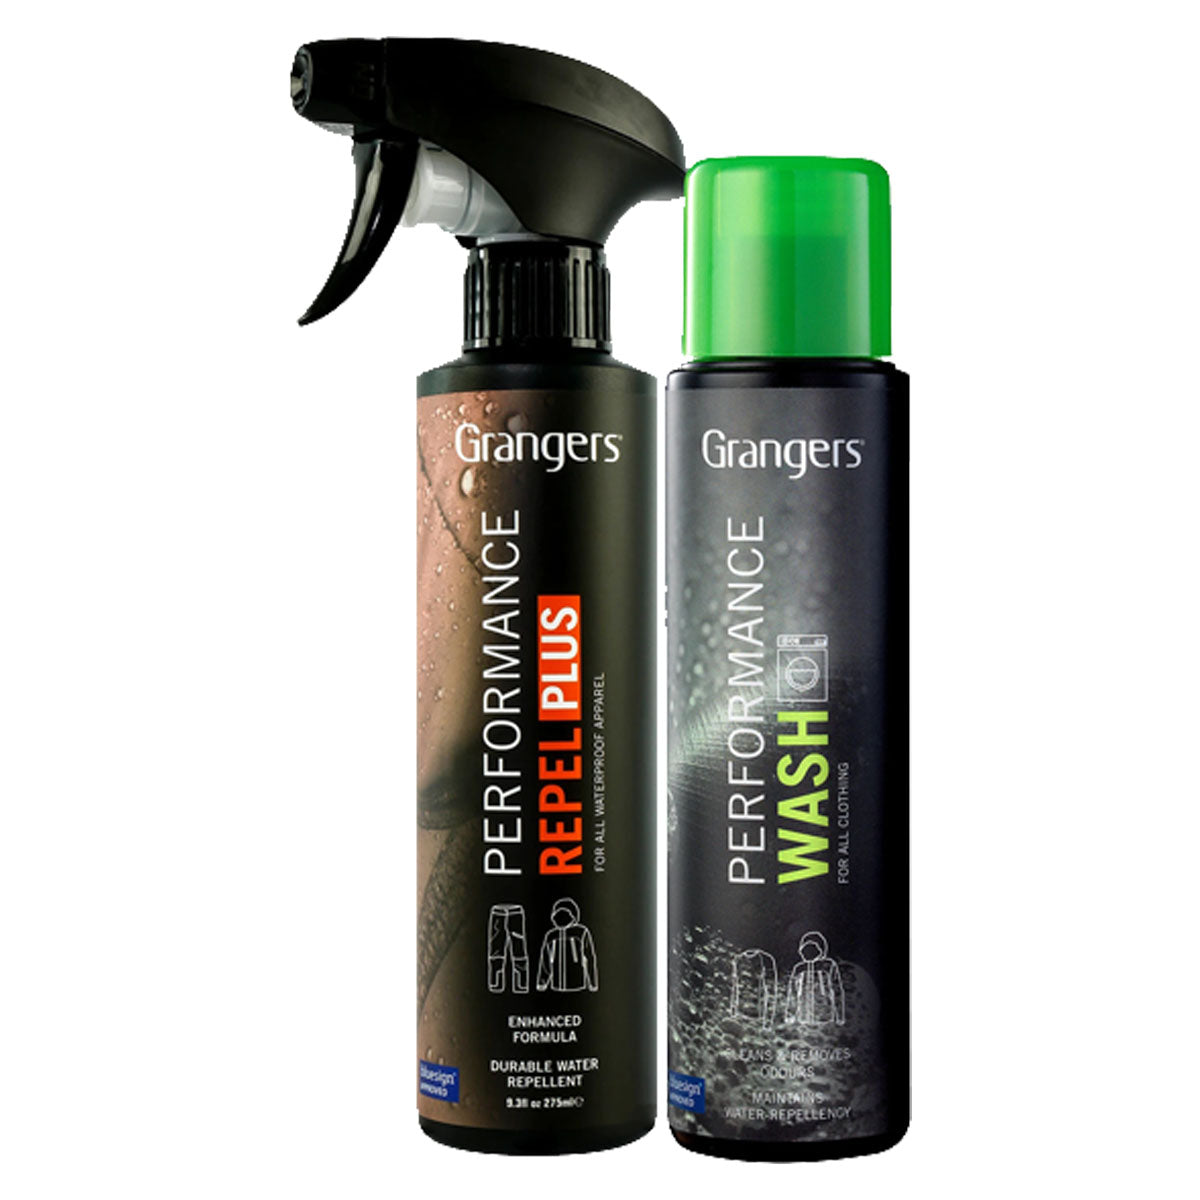 Grangers Performance Wash + Performance Repel Plus Combo Pack